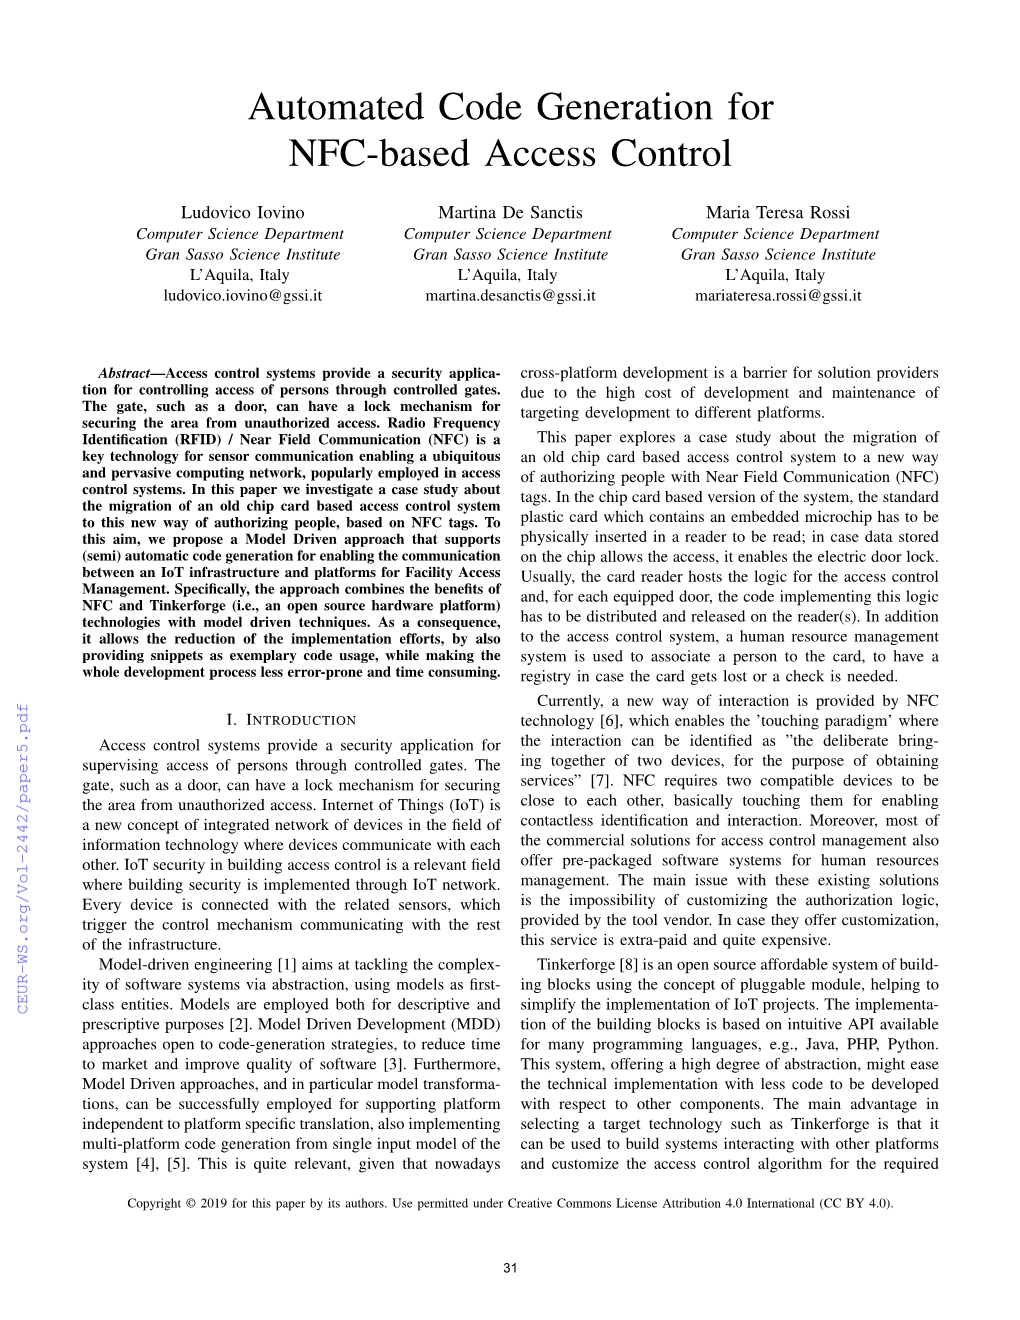 Automated Code Generation for NFC-Based Access Control